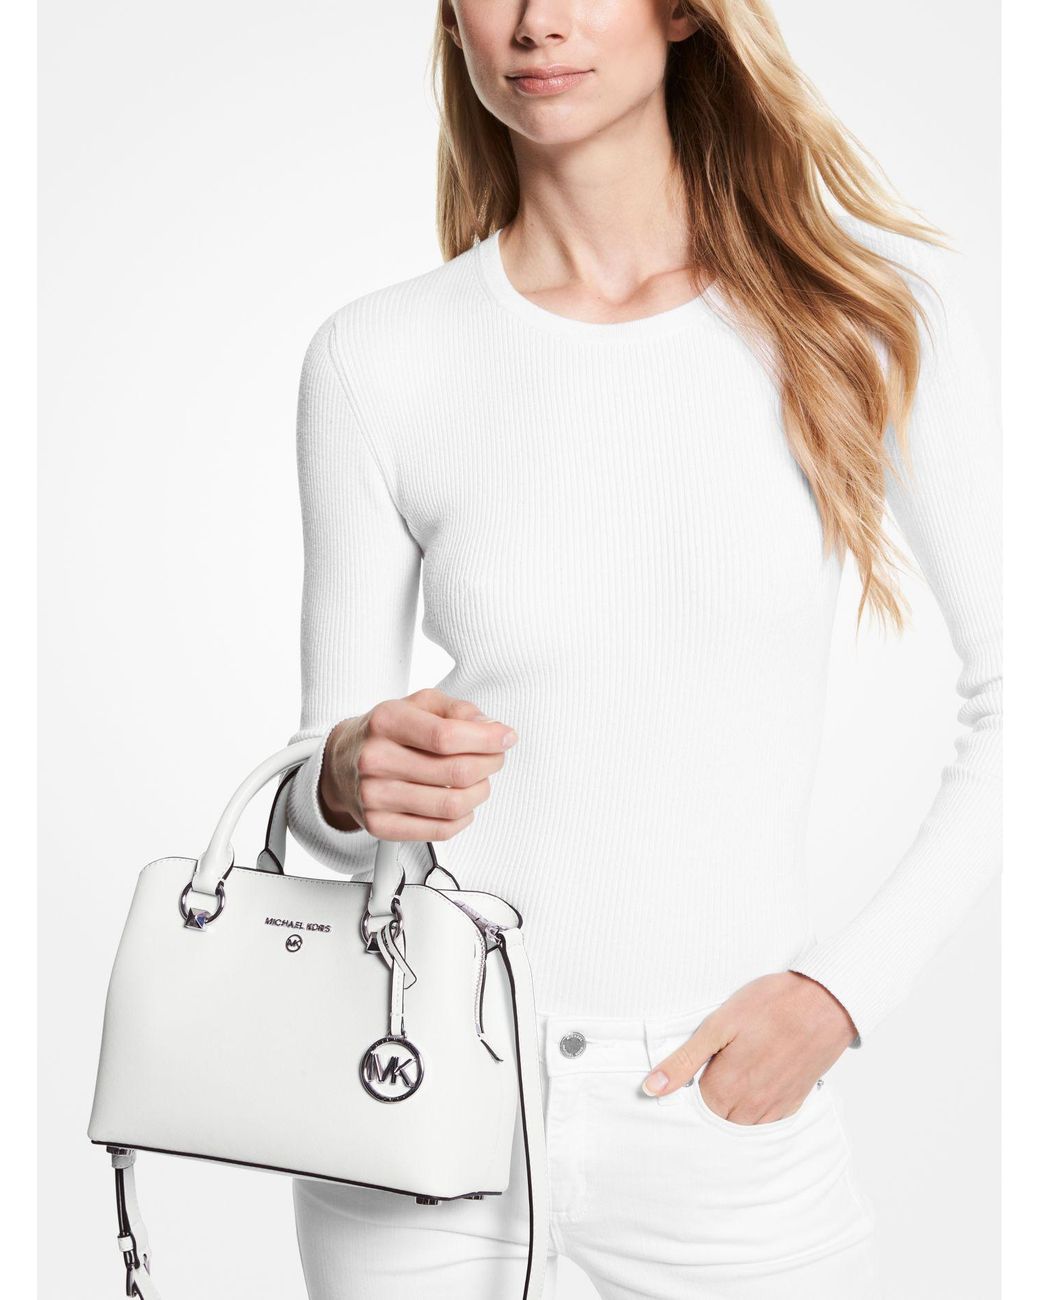 Michael Kors Edith Small Saffiano Leather Satchel in White | Lyst